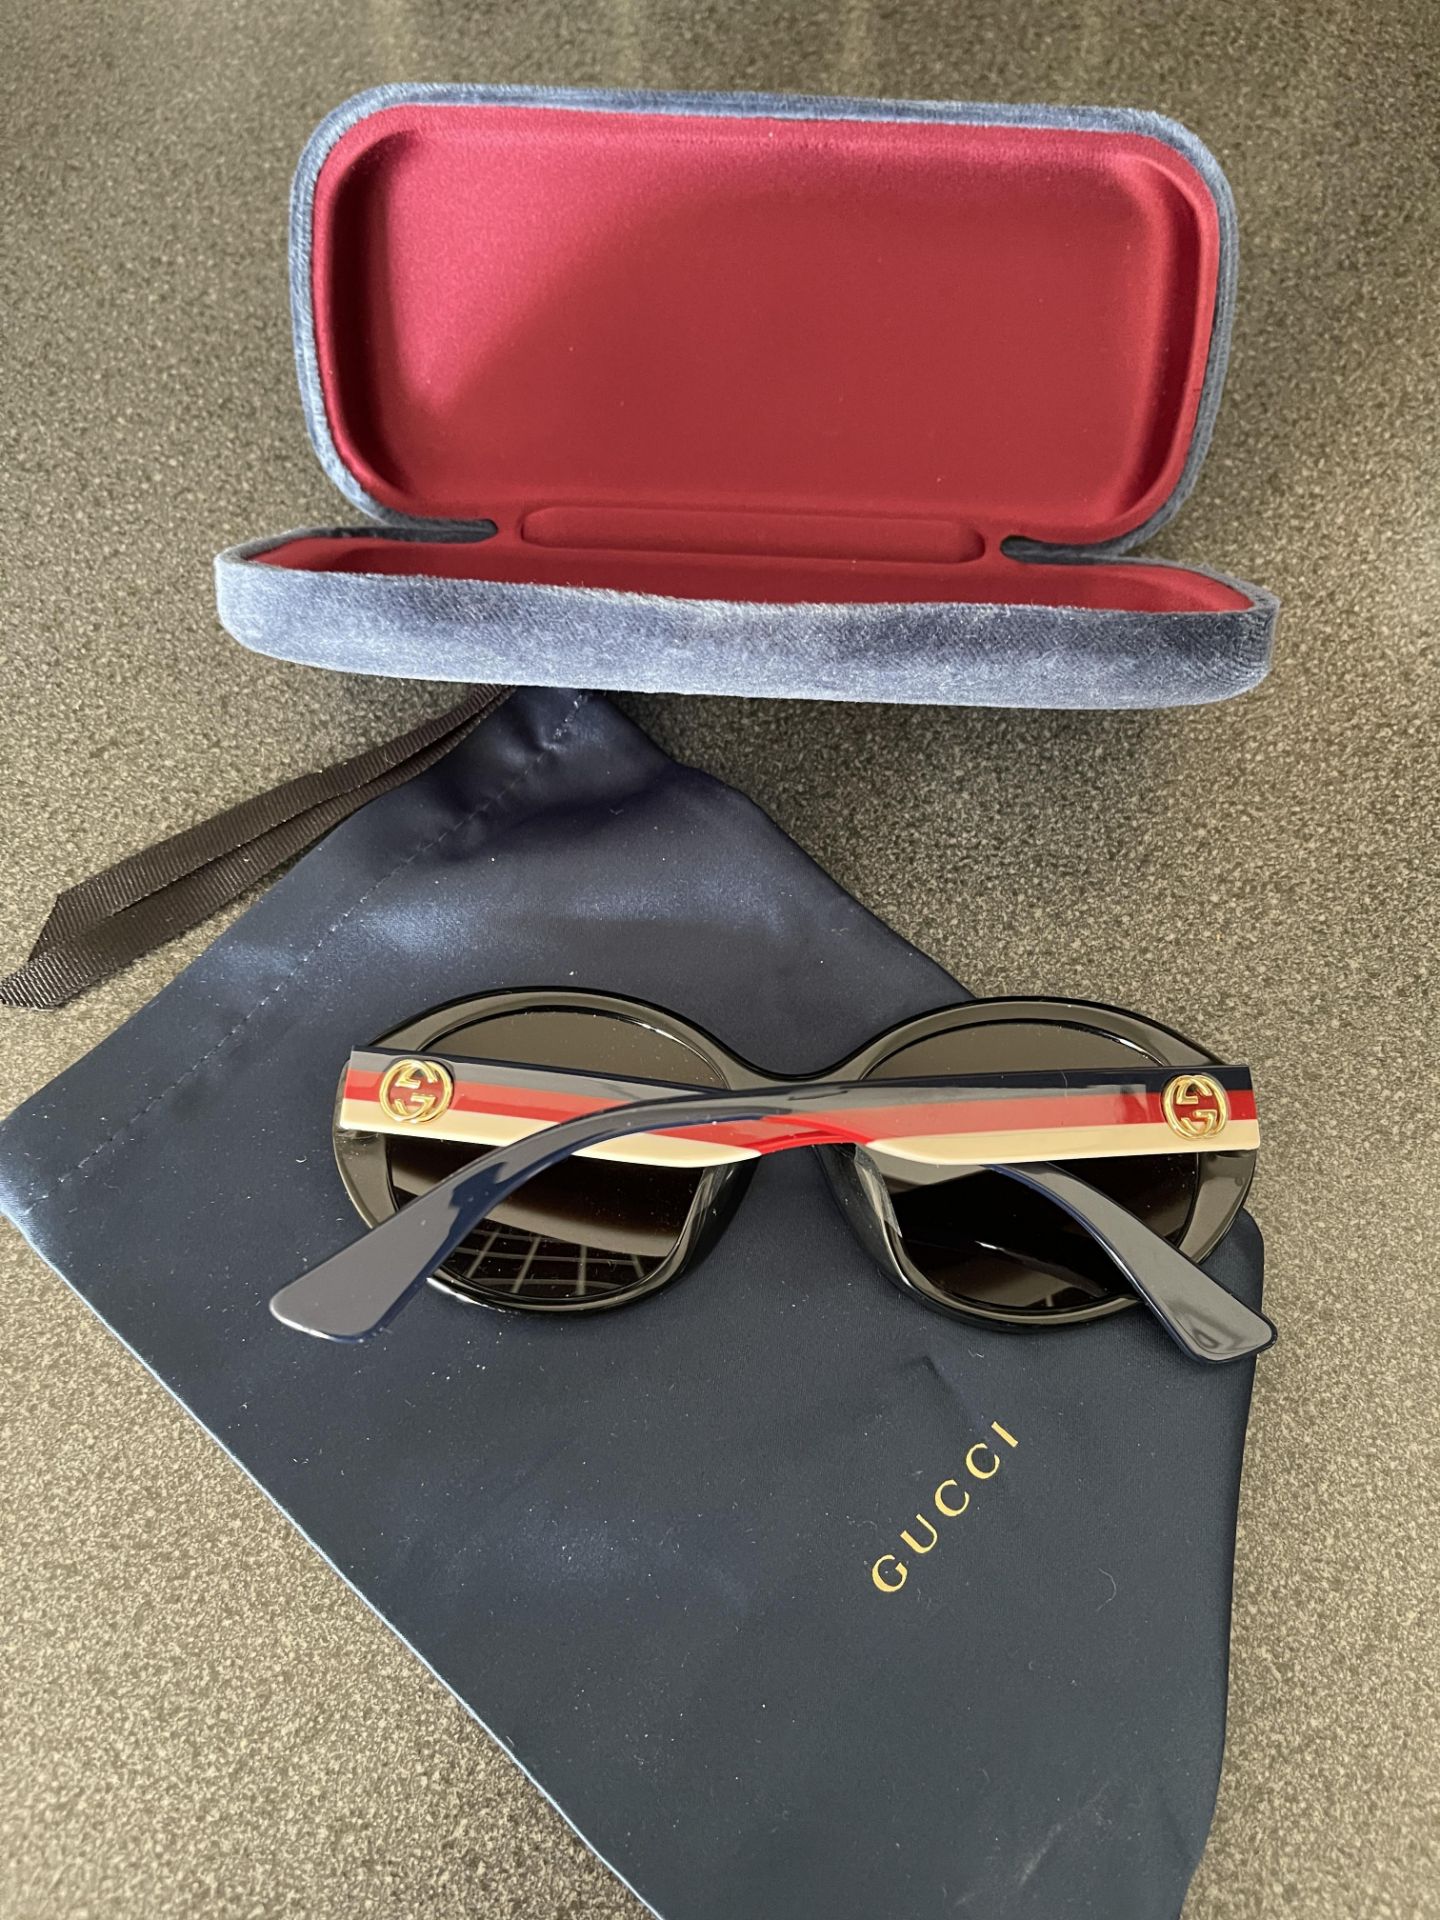 Gucci ladies sunglasses demon from a private jet charter. with case and cloth - Image 6 of 9